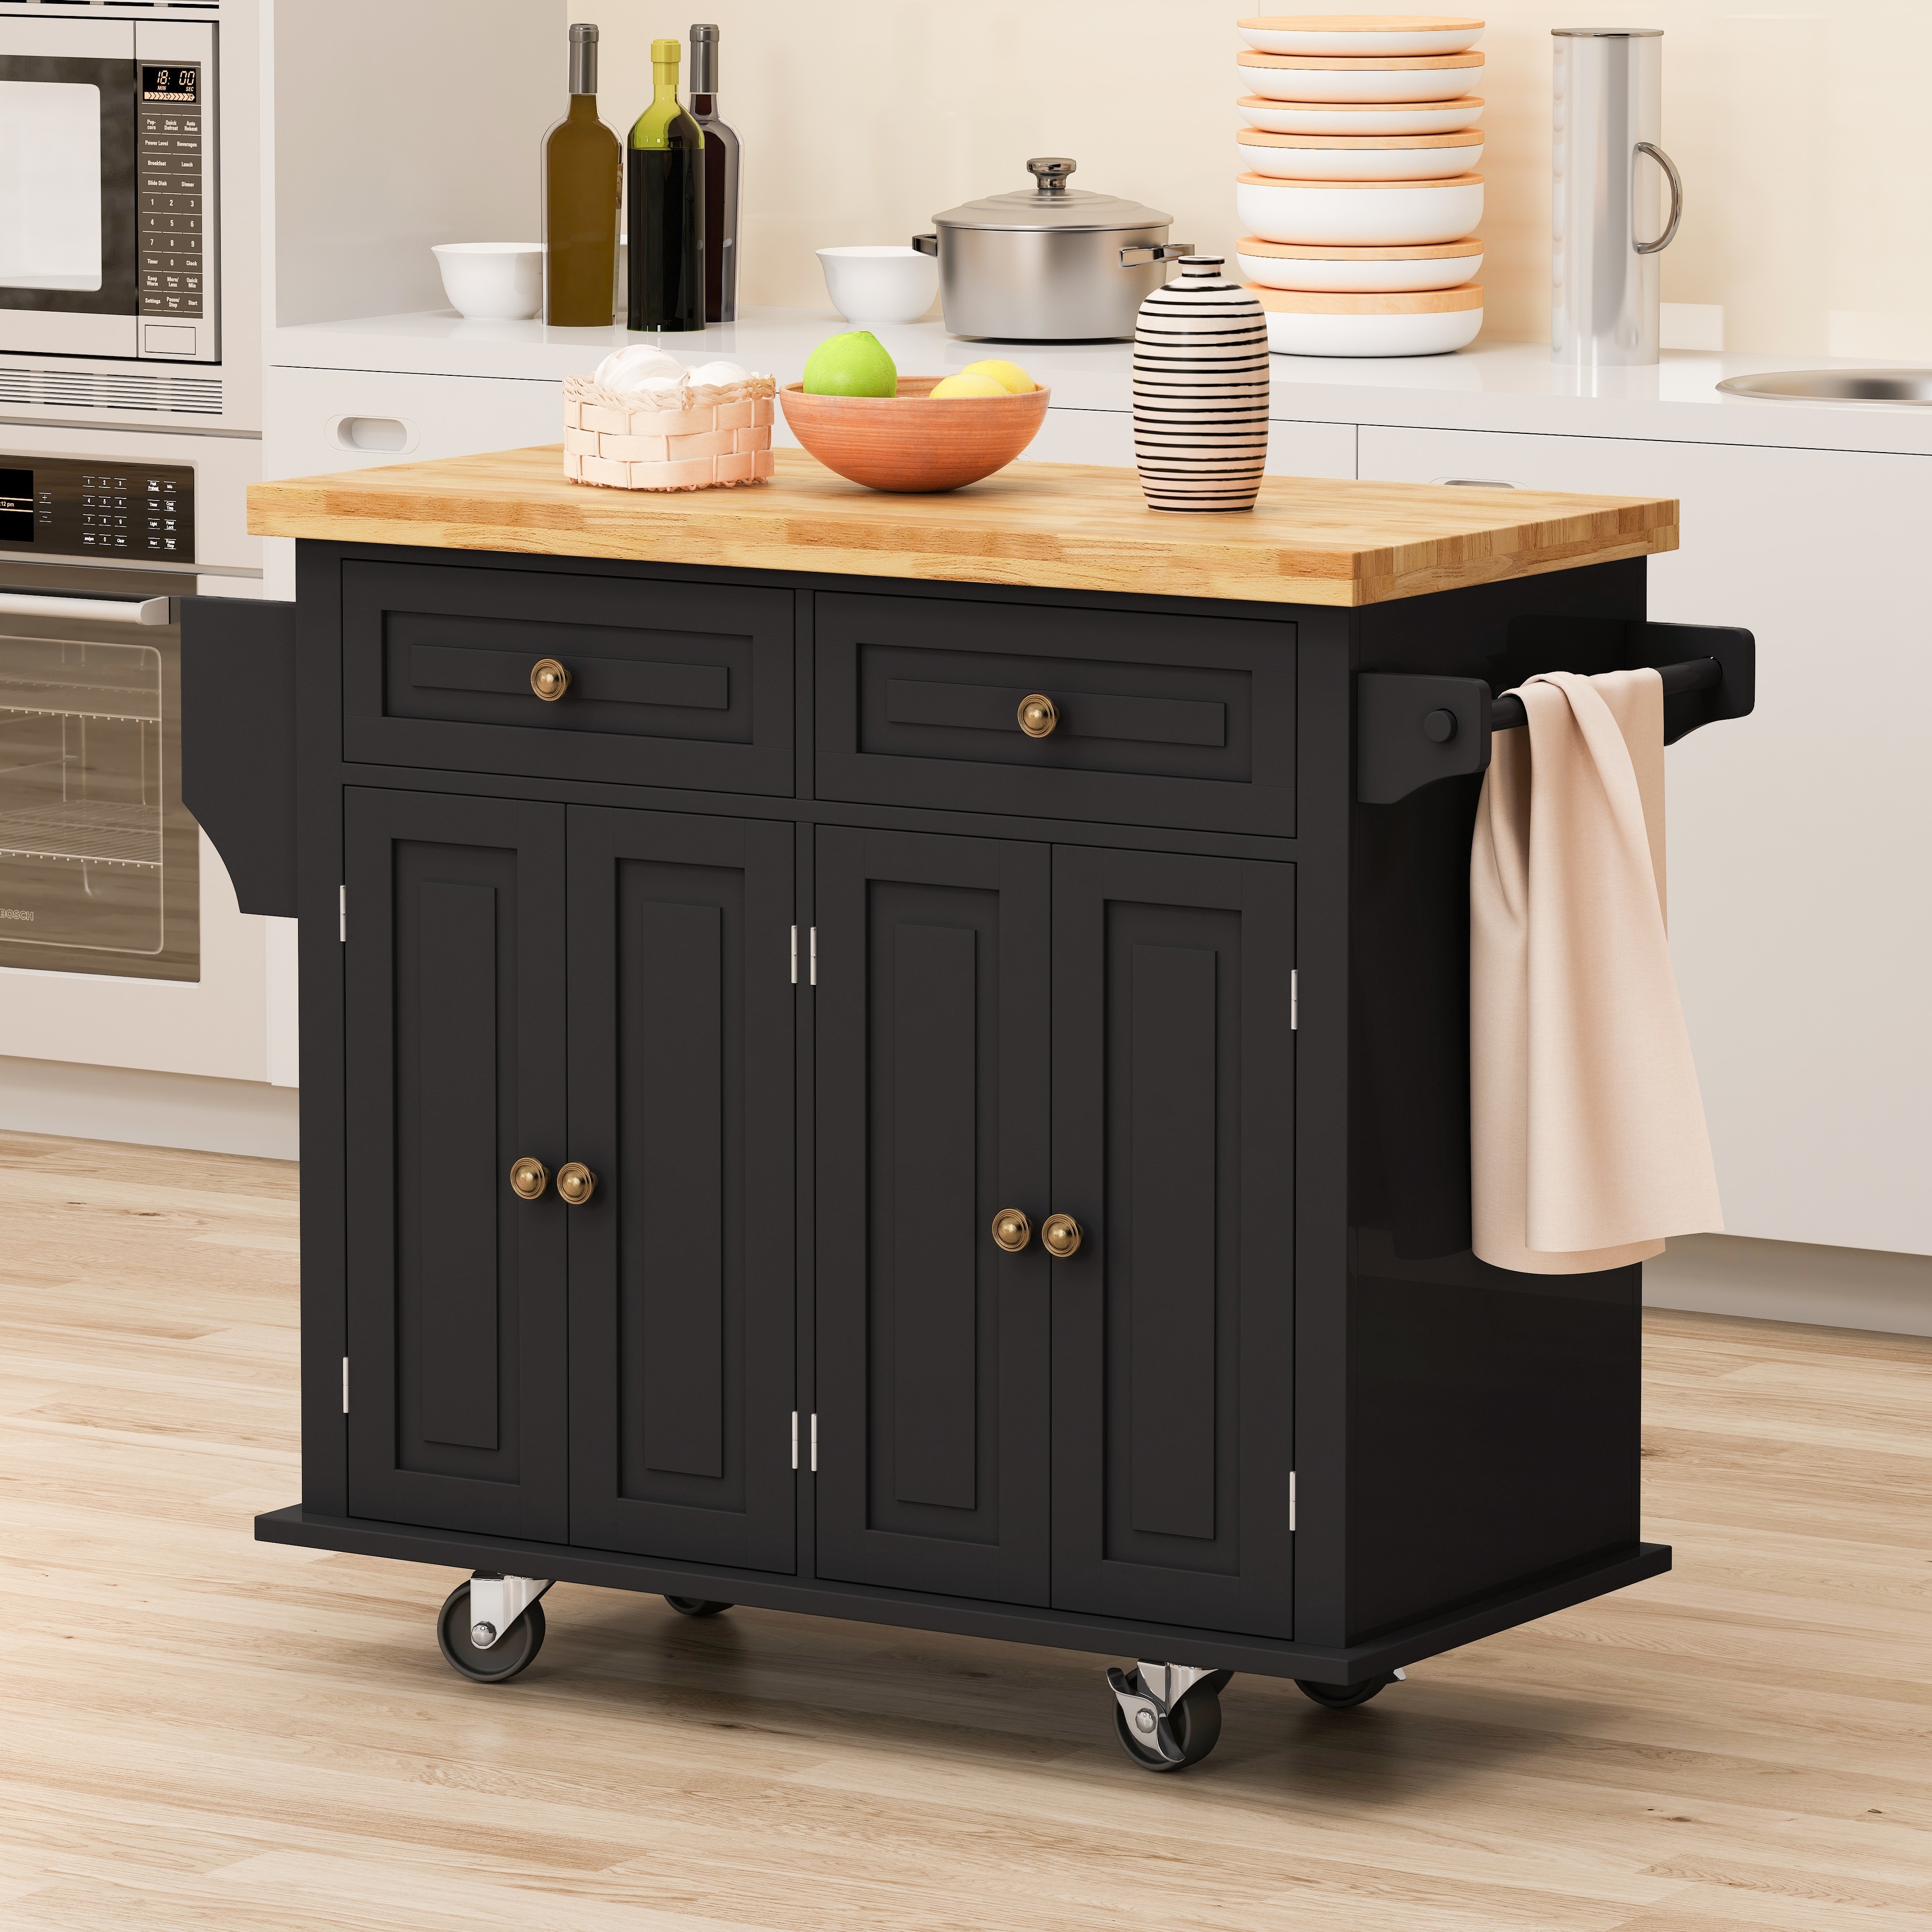 Kitchen Islands with Storage, Kitchen Carts and Islands Rolling Kitchen Island Storage Cabinets on Wheels with Drawers, Towel Rack and Shelves in